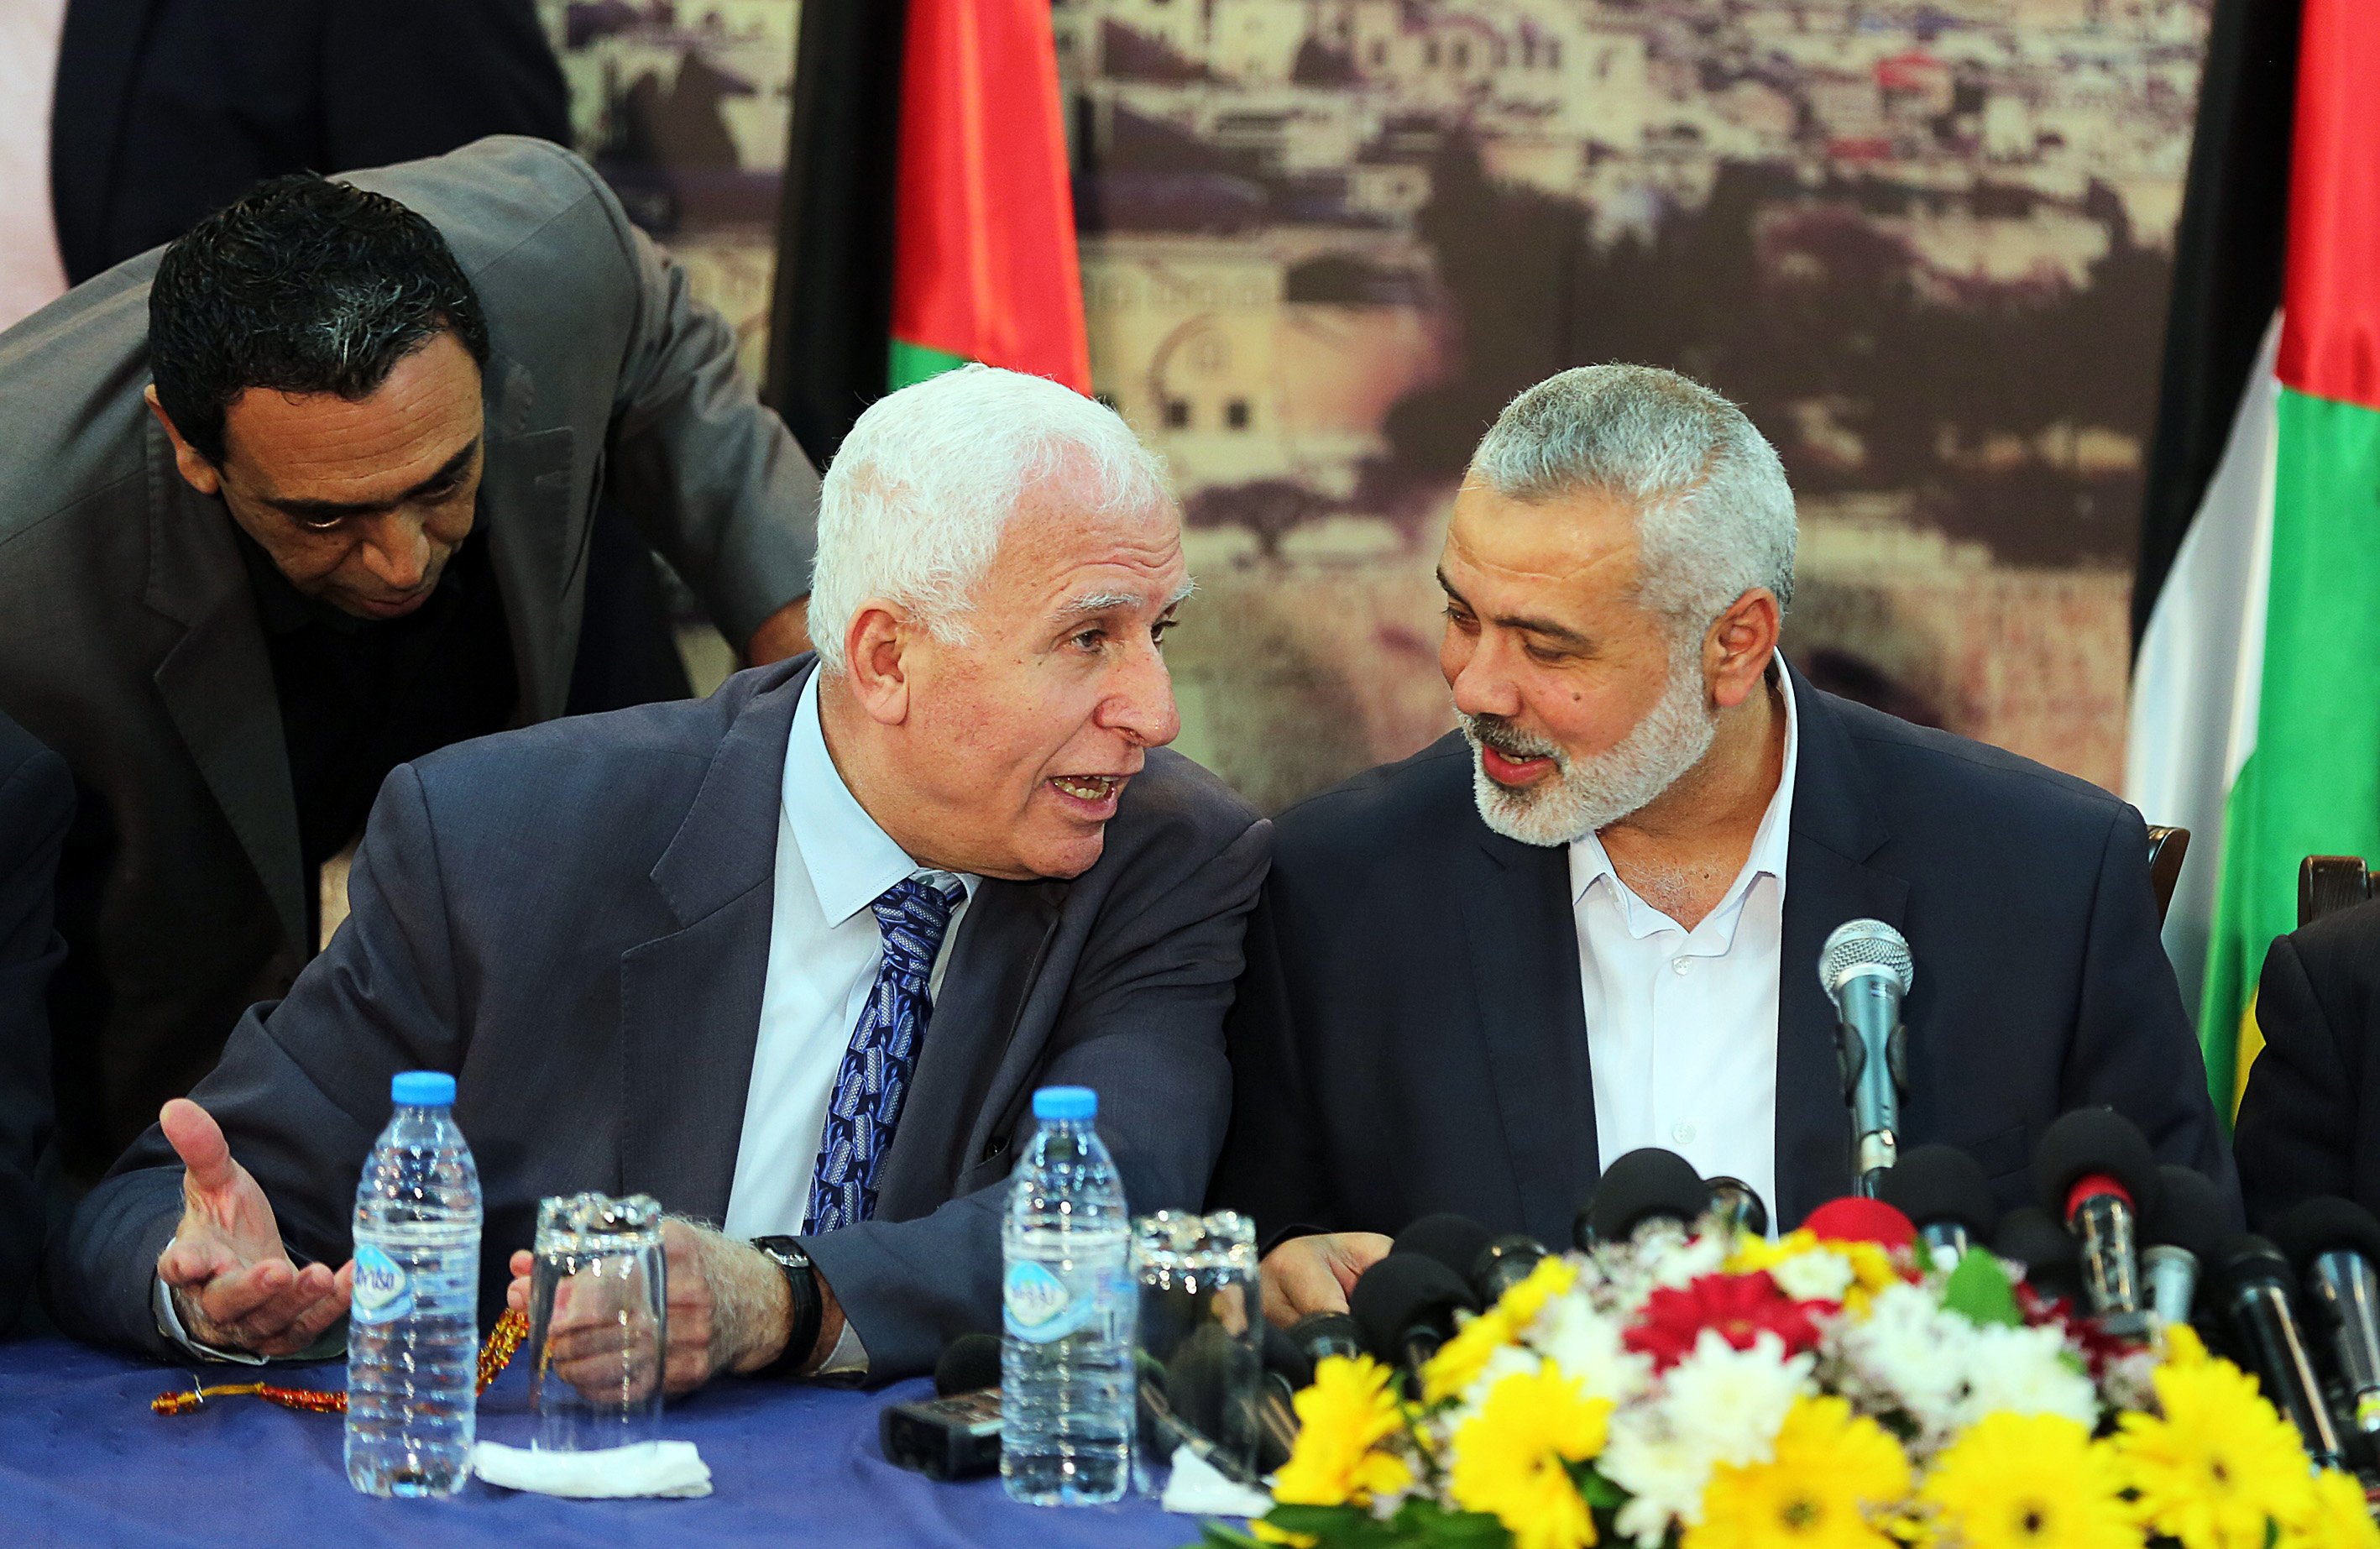 From left: Fatah movement Leader Azzam Al-Ahmad and Palestinian Prime Minister Ismail Haniyeh speak during a press conference following the meeting to end Palestinian divisions between Fatah and Hamas movement in Gaza City on April 23, 2014.